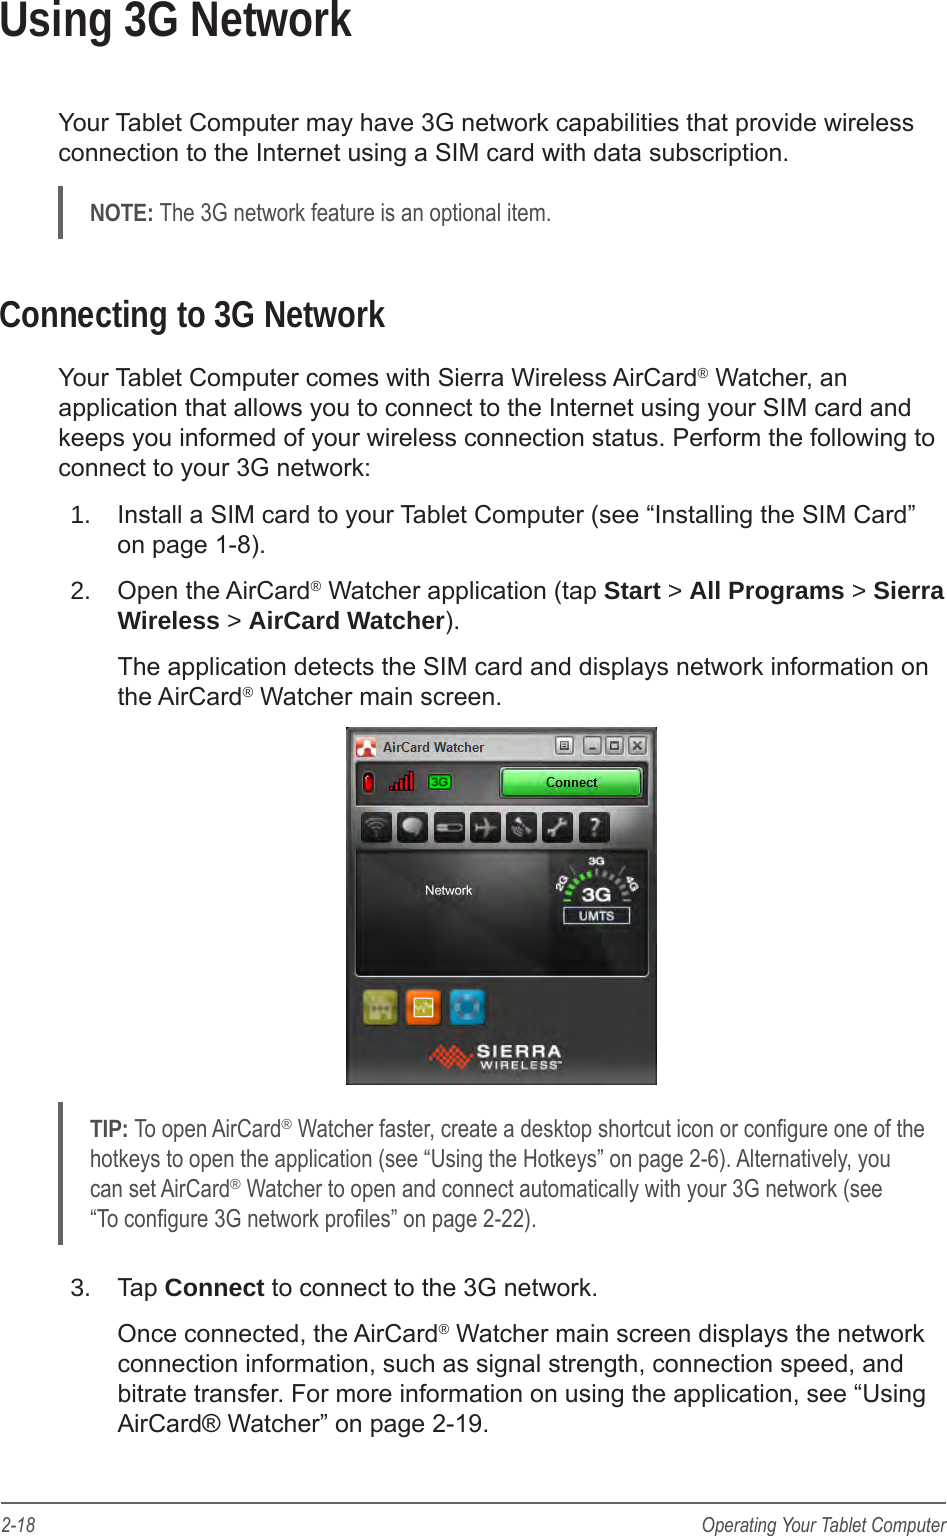 2-18 Operating Your Tablet ComputerUsing 3G NetworkYour Tablet Computer may have 3G network capabilities that provide wireless connection to the Internet using a SIM card with data subscription.NOTE: The 3G network feature is an optional item.Connecting to 3G NetworkYour Tablet Computer comes with Sierra Wireless AirCard® Watcher, an application that allows you to connect to the Internet using your SIM card and keeps you informed of your wireless connection status. Perform the following to connect to your 3G network:1.  Install a SIM card to your Tablet Computer (see “Installing the SIM Card” on page 1-8).2.  Open the AirCard® Watcher application (tap Start &gt; All Programs &gt; Sierra Wireless &gt; AirCard Watcher).The application detects the SIM card and displays network information on the AirCard® Watcher main screen.TIP: To open AirCard® Watcher faster, create a desktop shortcut icon or congure one of the hotkeys to open the application (see “Using the Hotkeys” on page 2-6). Alternatively, you can set AirCard® Watcher to open and connect automatically with your 3G network (see “To congure 3G network proles” on page 2-22).3.  Tap Connect to connect to the 3G network.Once connected, the AirCard® Watcher main screen displays the network connection information, such as signal strength, connection speed, and bitrate transfer. For more information on using the application, see “Using AirCard® Watcher” on page 2-19.